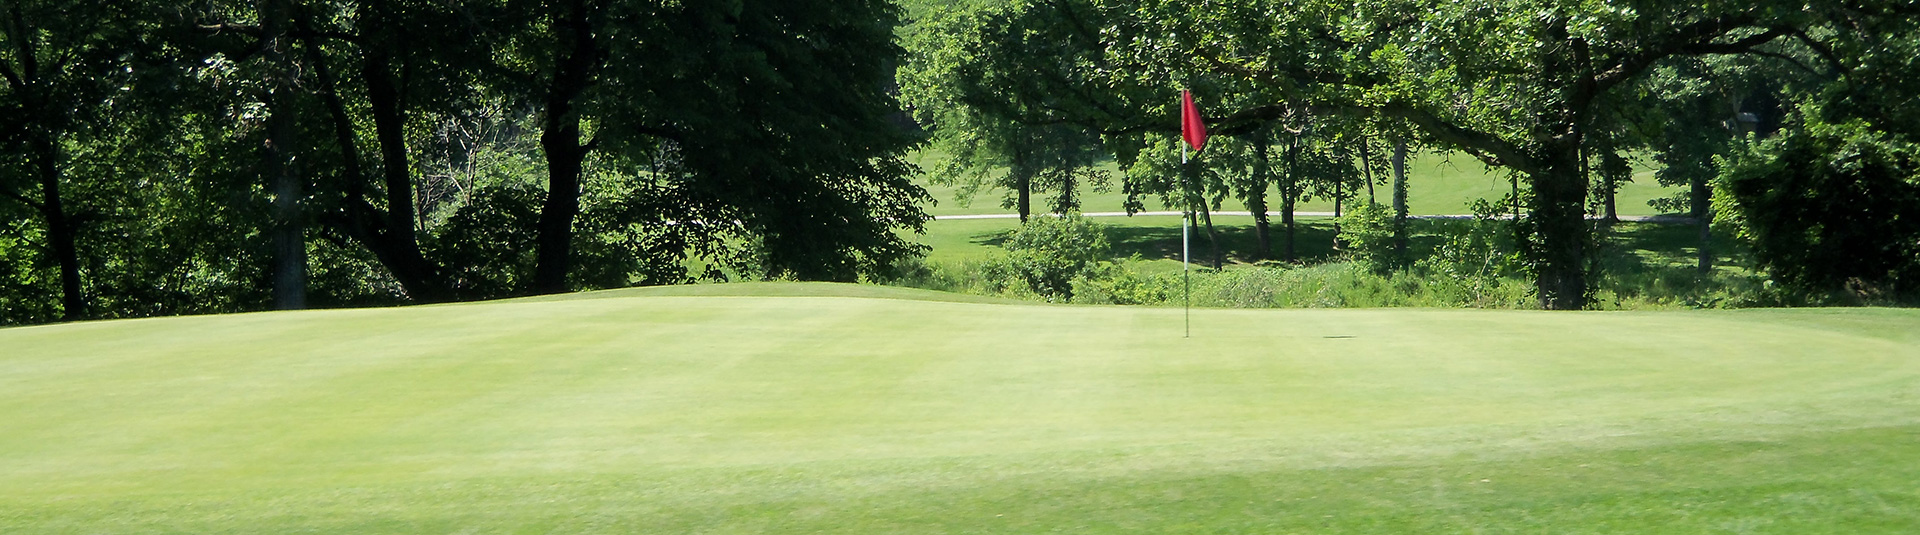 view of golf course green with flagpole